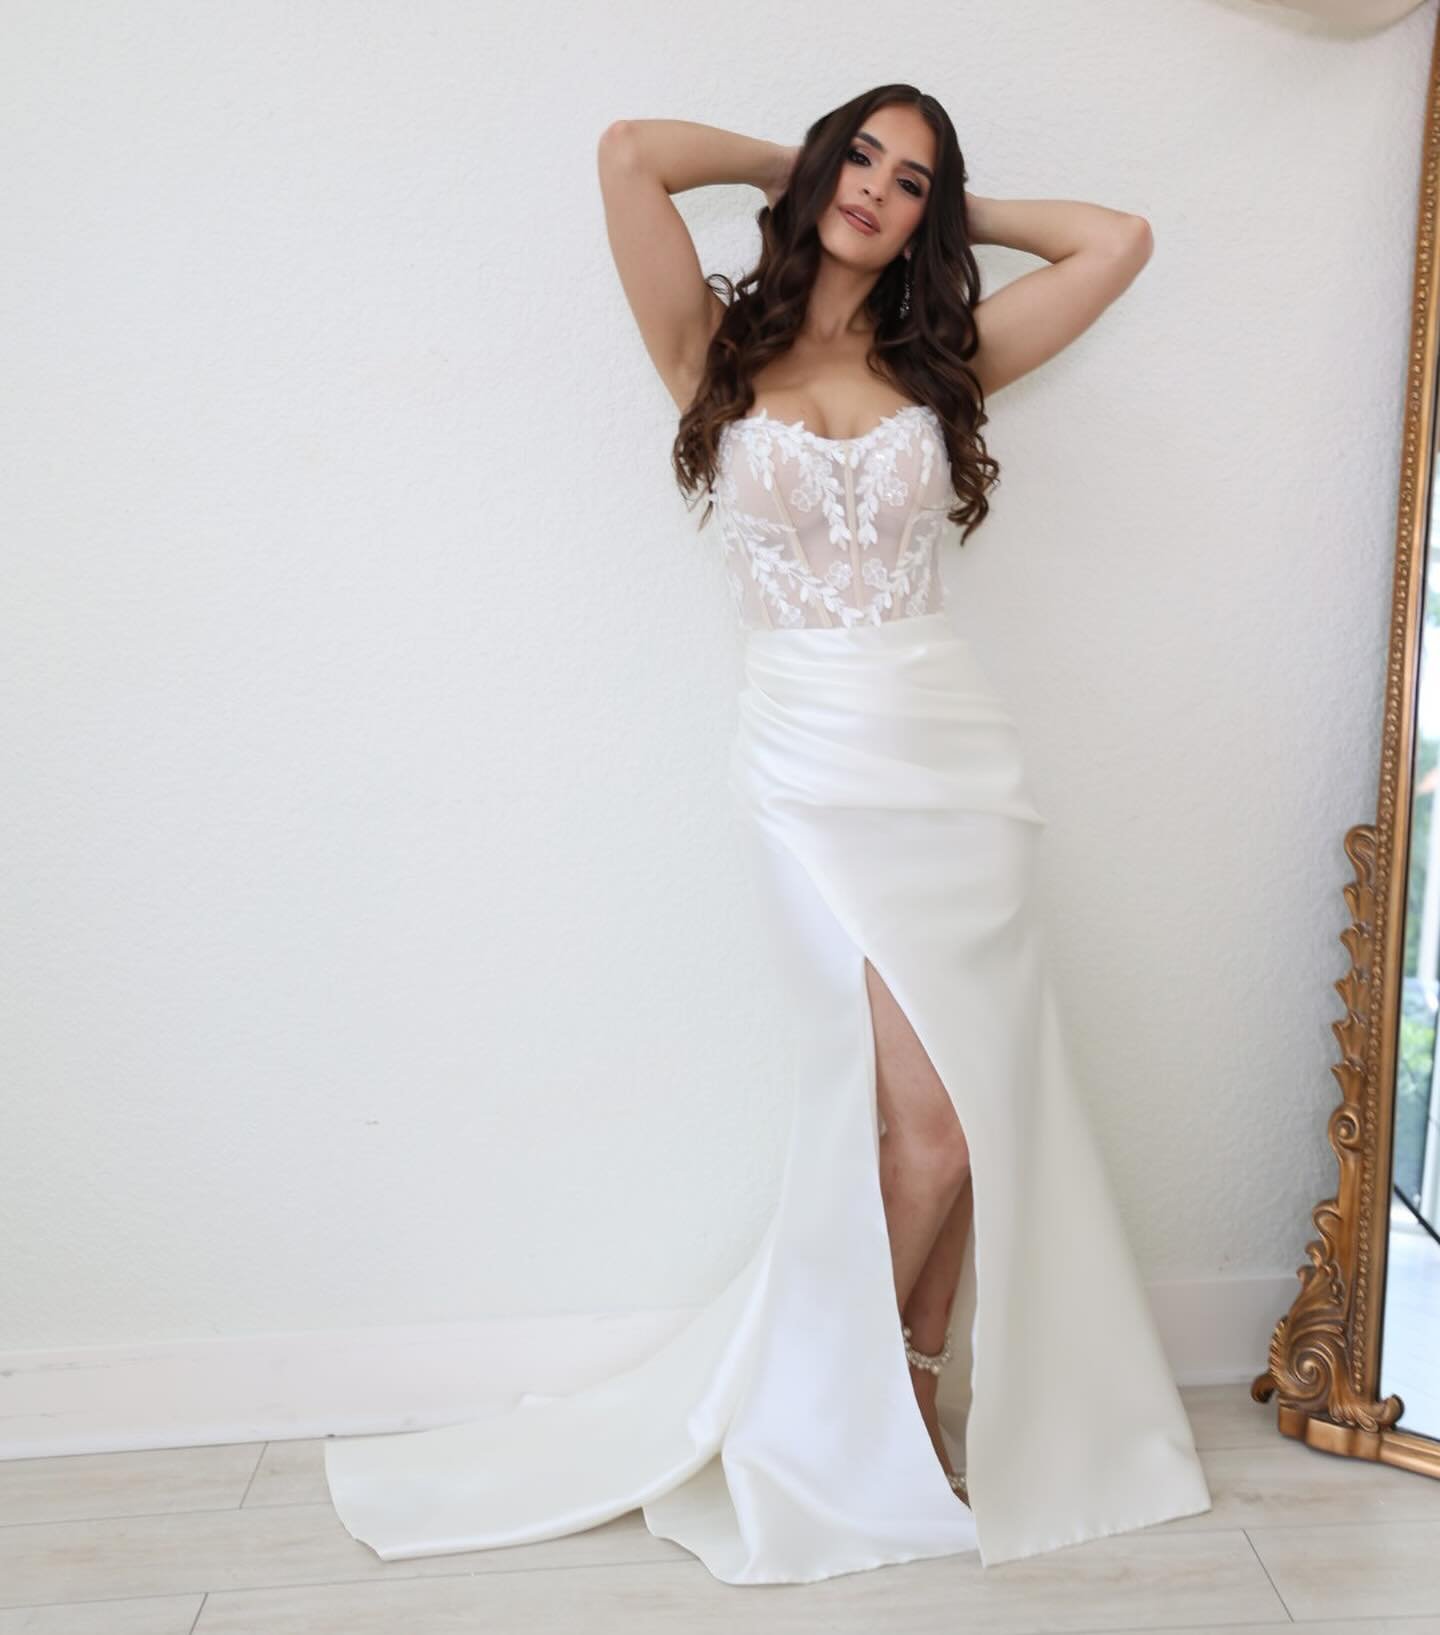 What do all these gowns have in common??? 
#miamibride #weddingdress #sayyestothedress